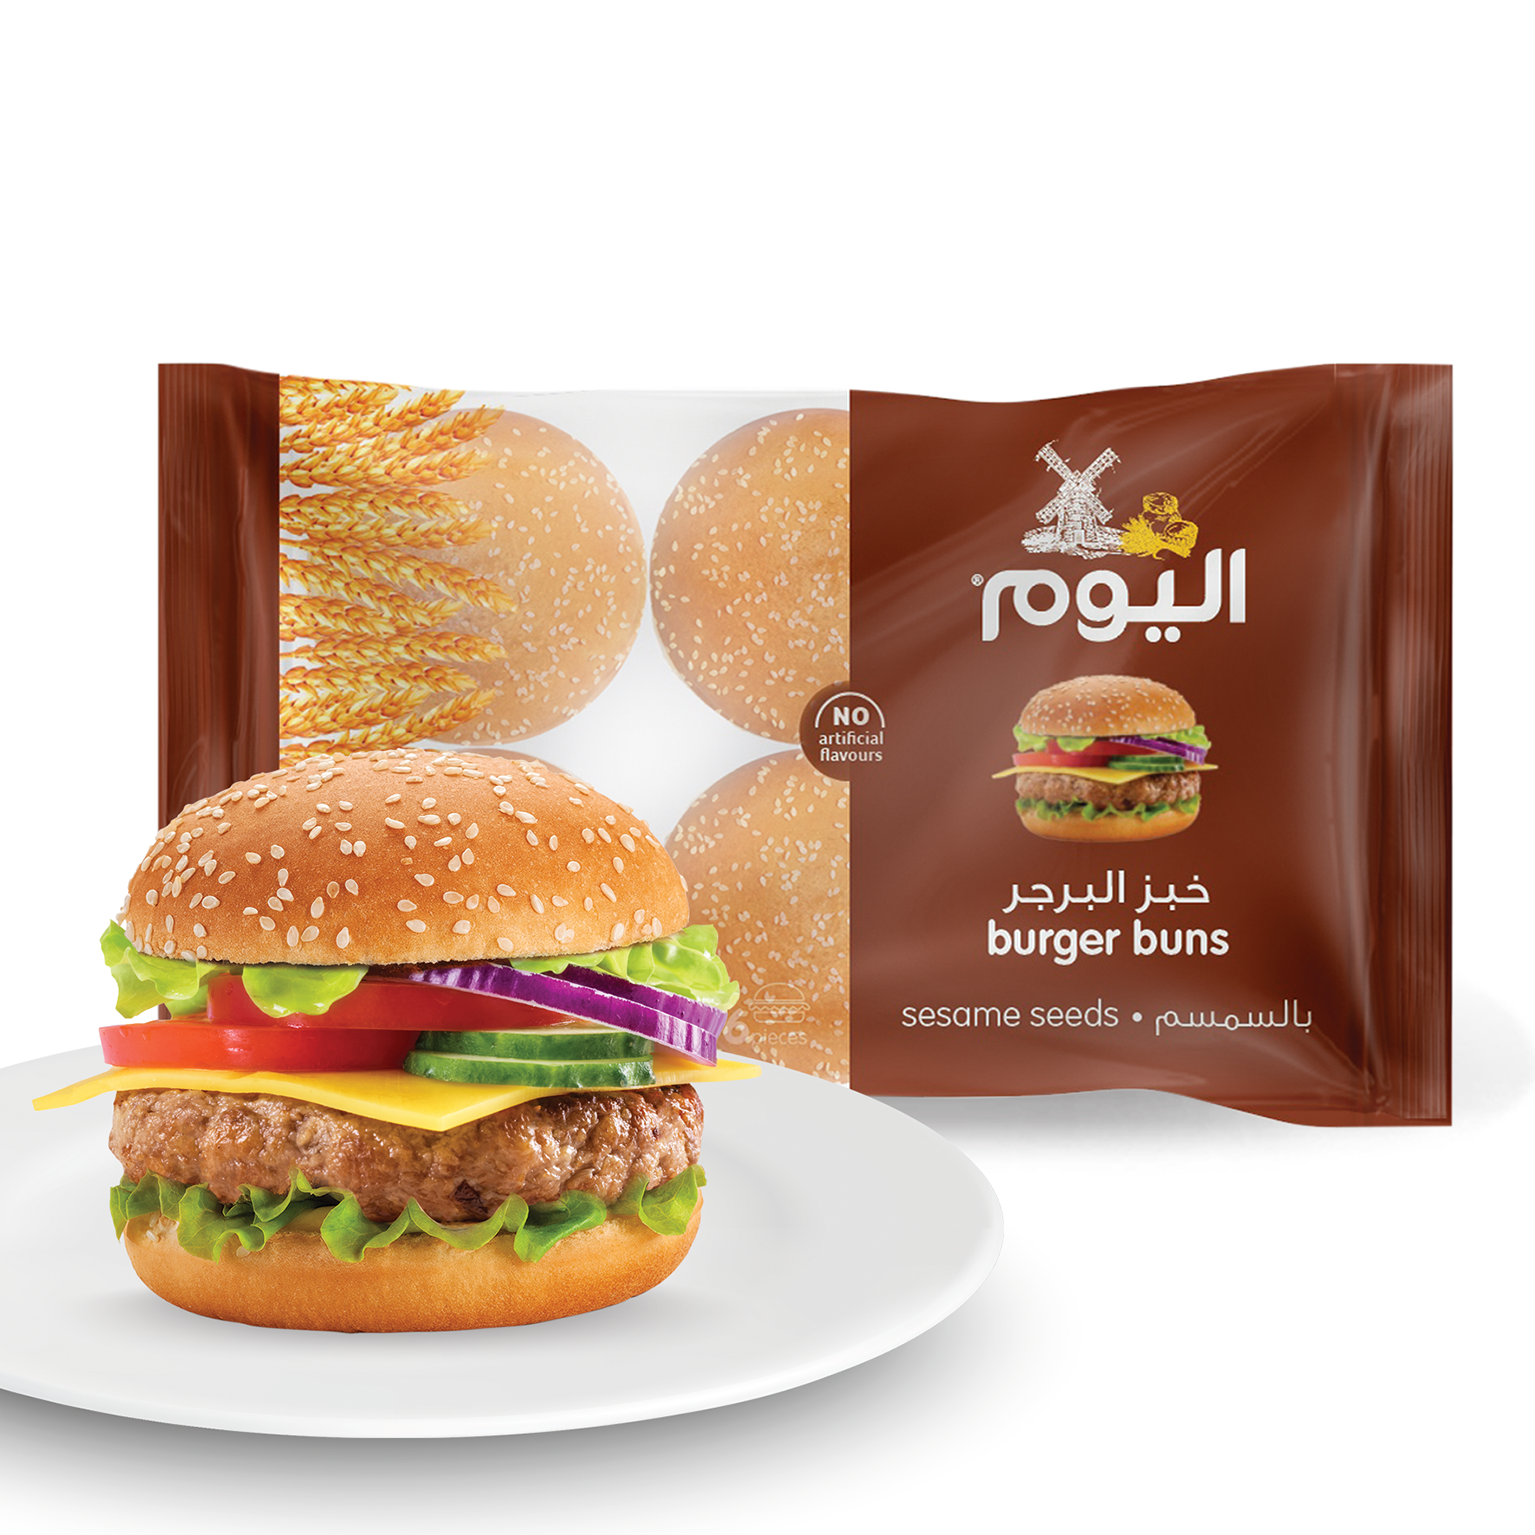 ROLLS & BUNS PRODUCT CATEGORY